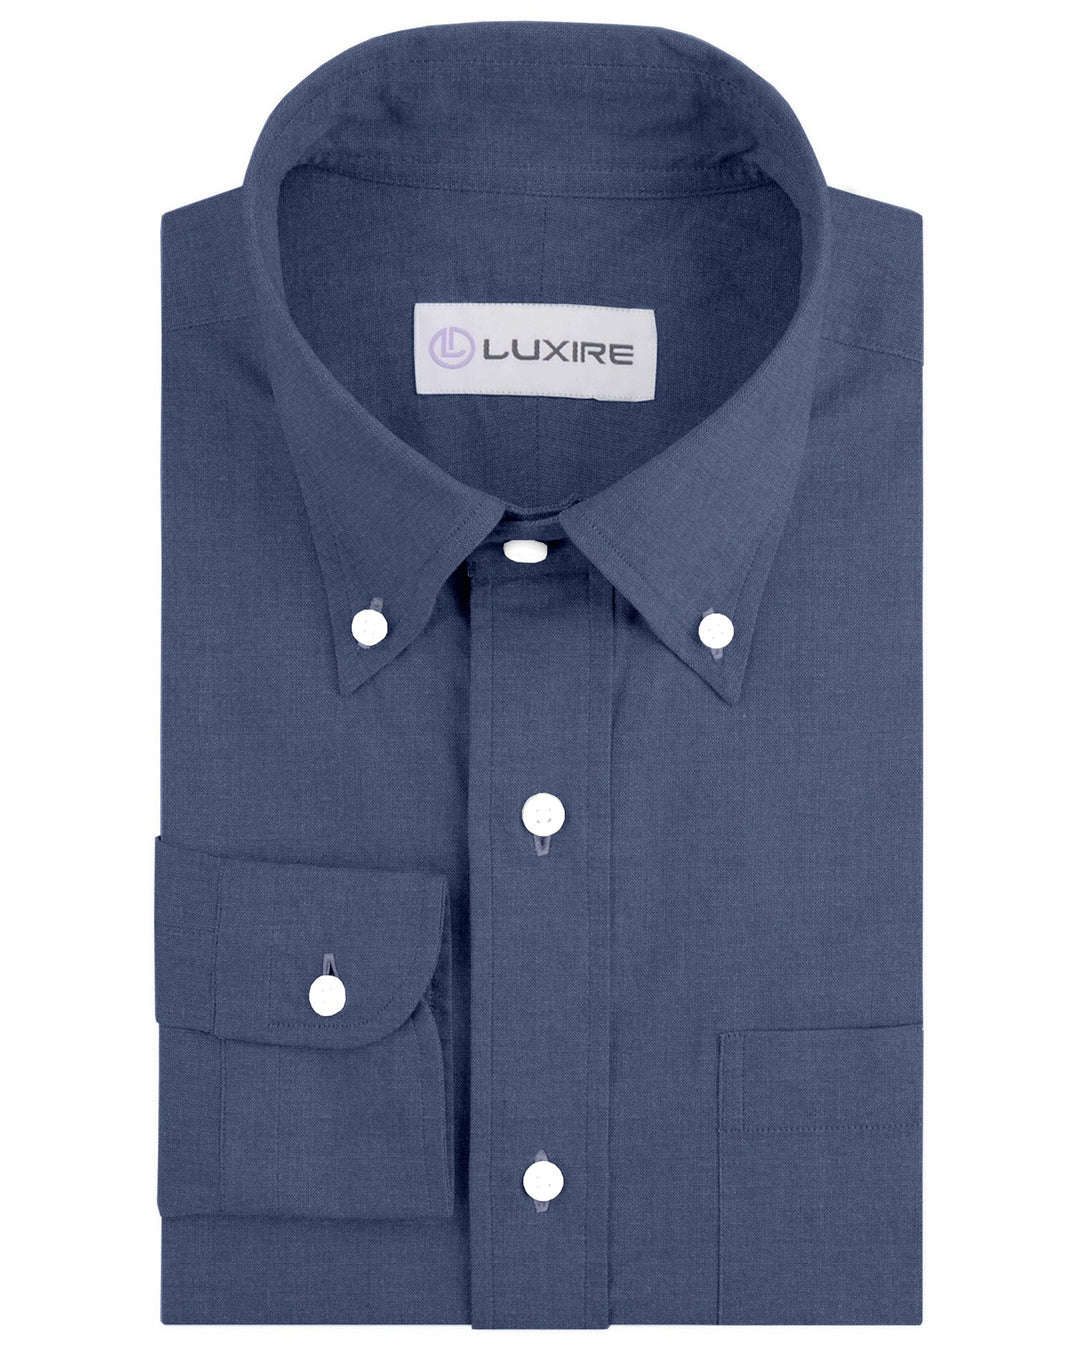 Front of the custom linen shirt for men in indigo denim by Luxire Clothing